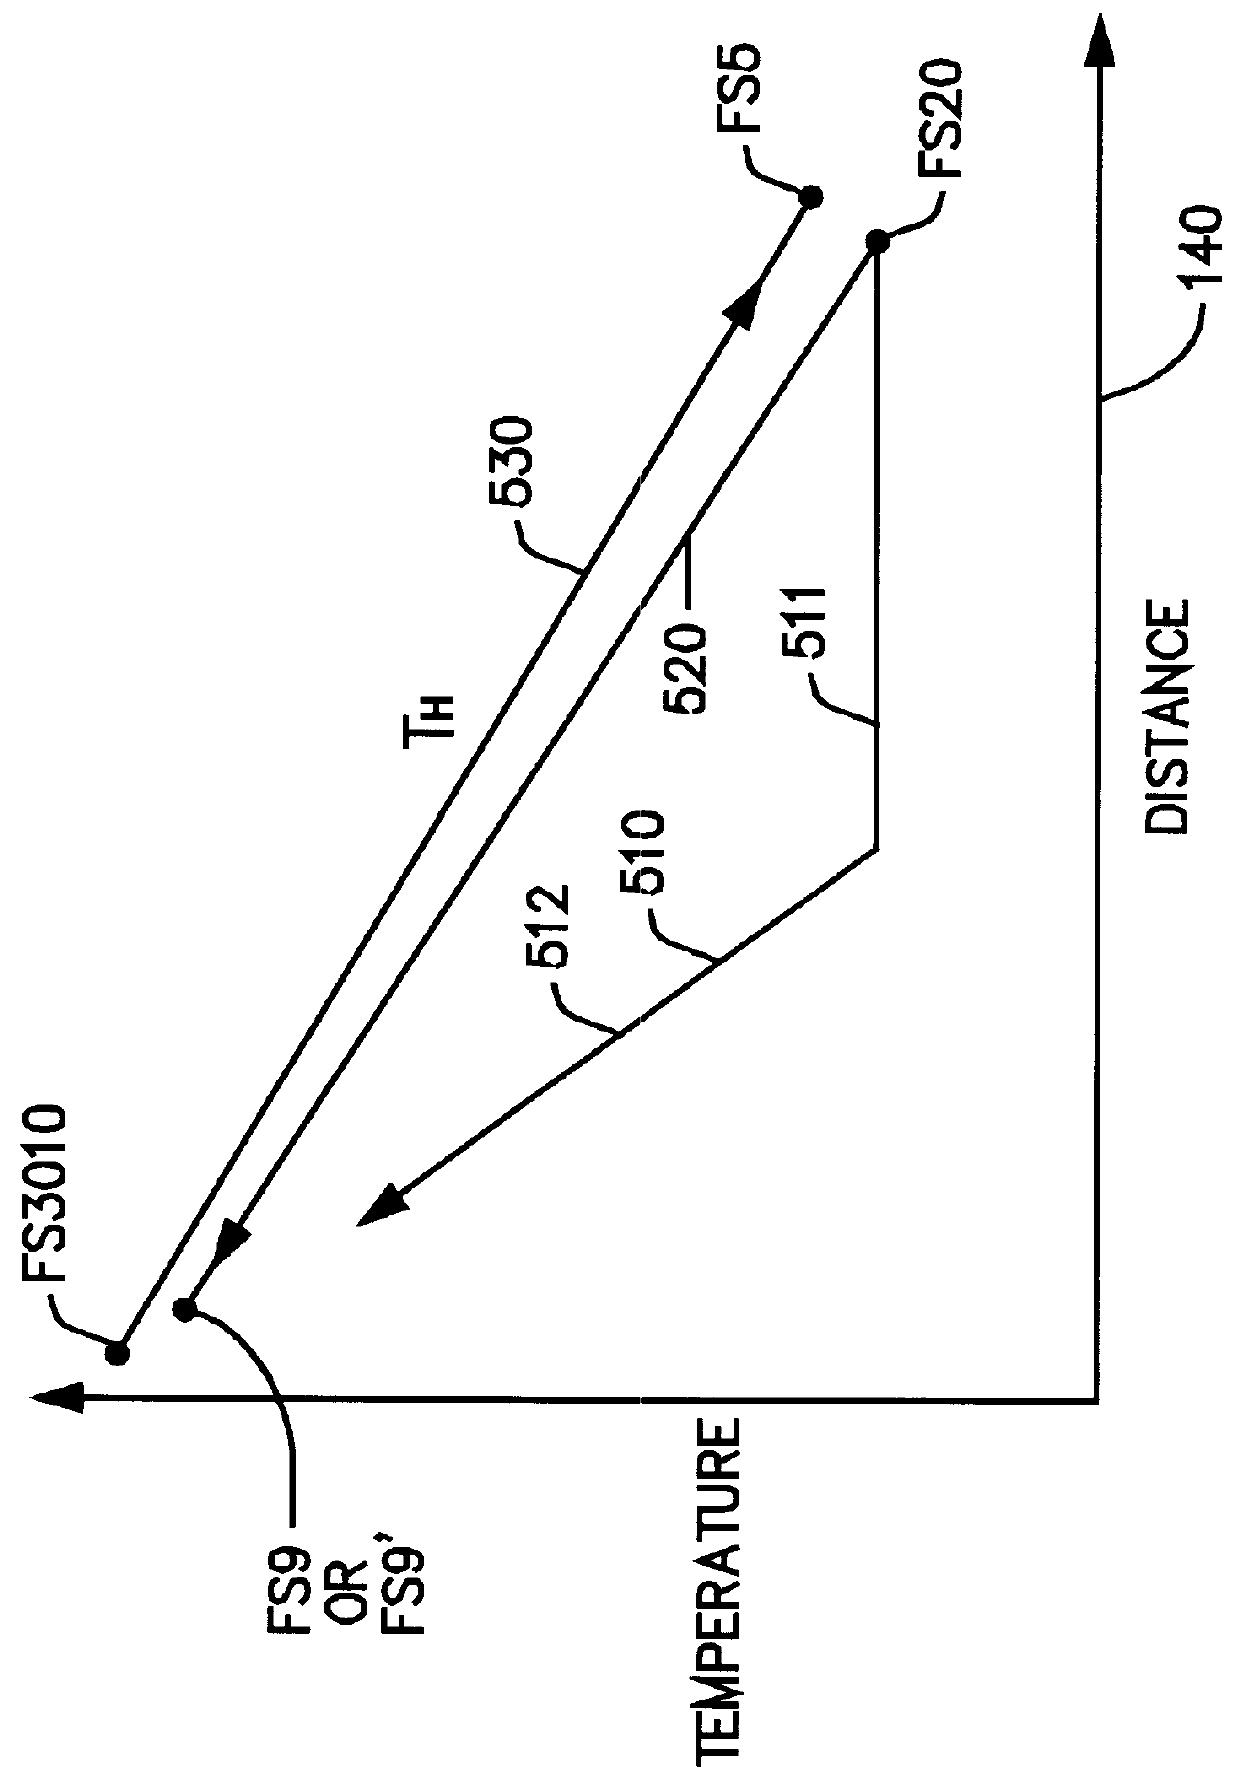 Technique for controlling superheated vapor requirements due to varying conditions in a Kalina cycle power generation system cross-reference to related applications